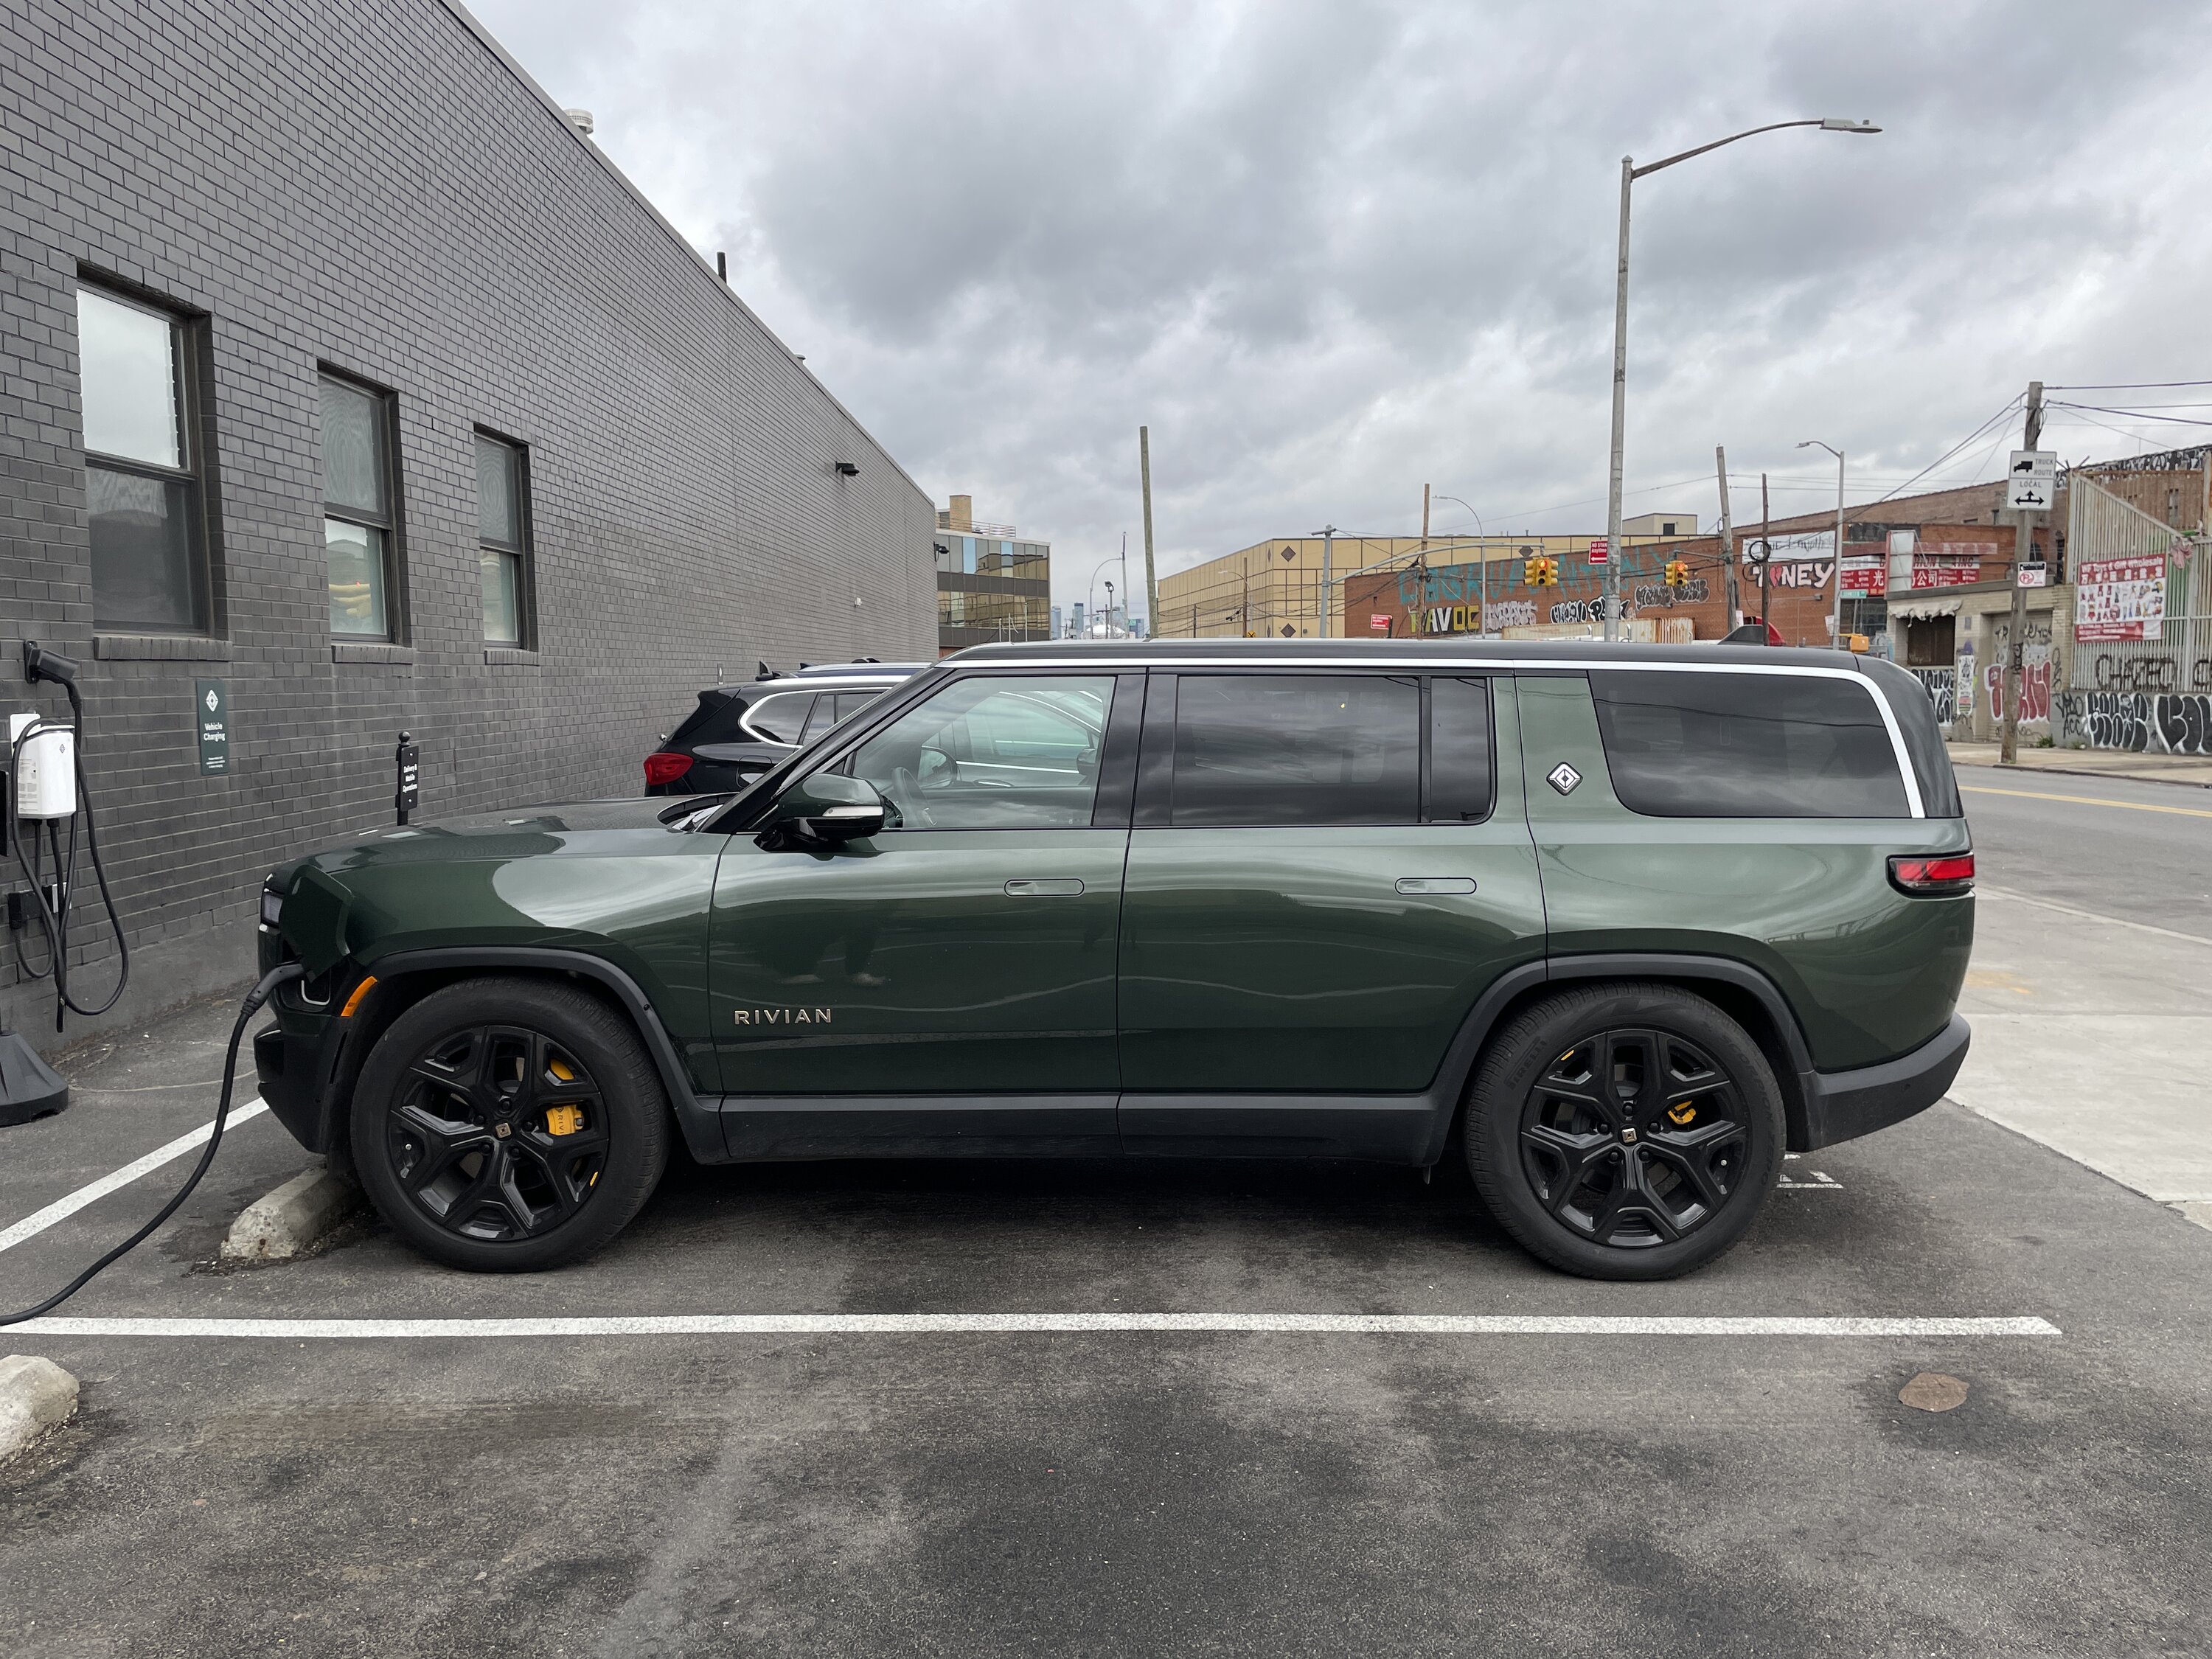 Rivian R1T R1S R1S and R1T driving differences and First Drive experience - Brooklyn IMG_4369